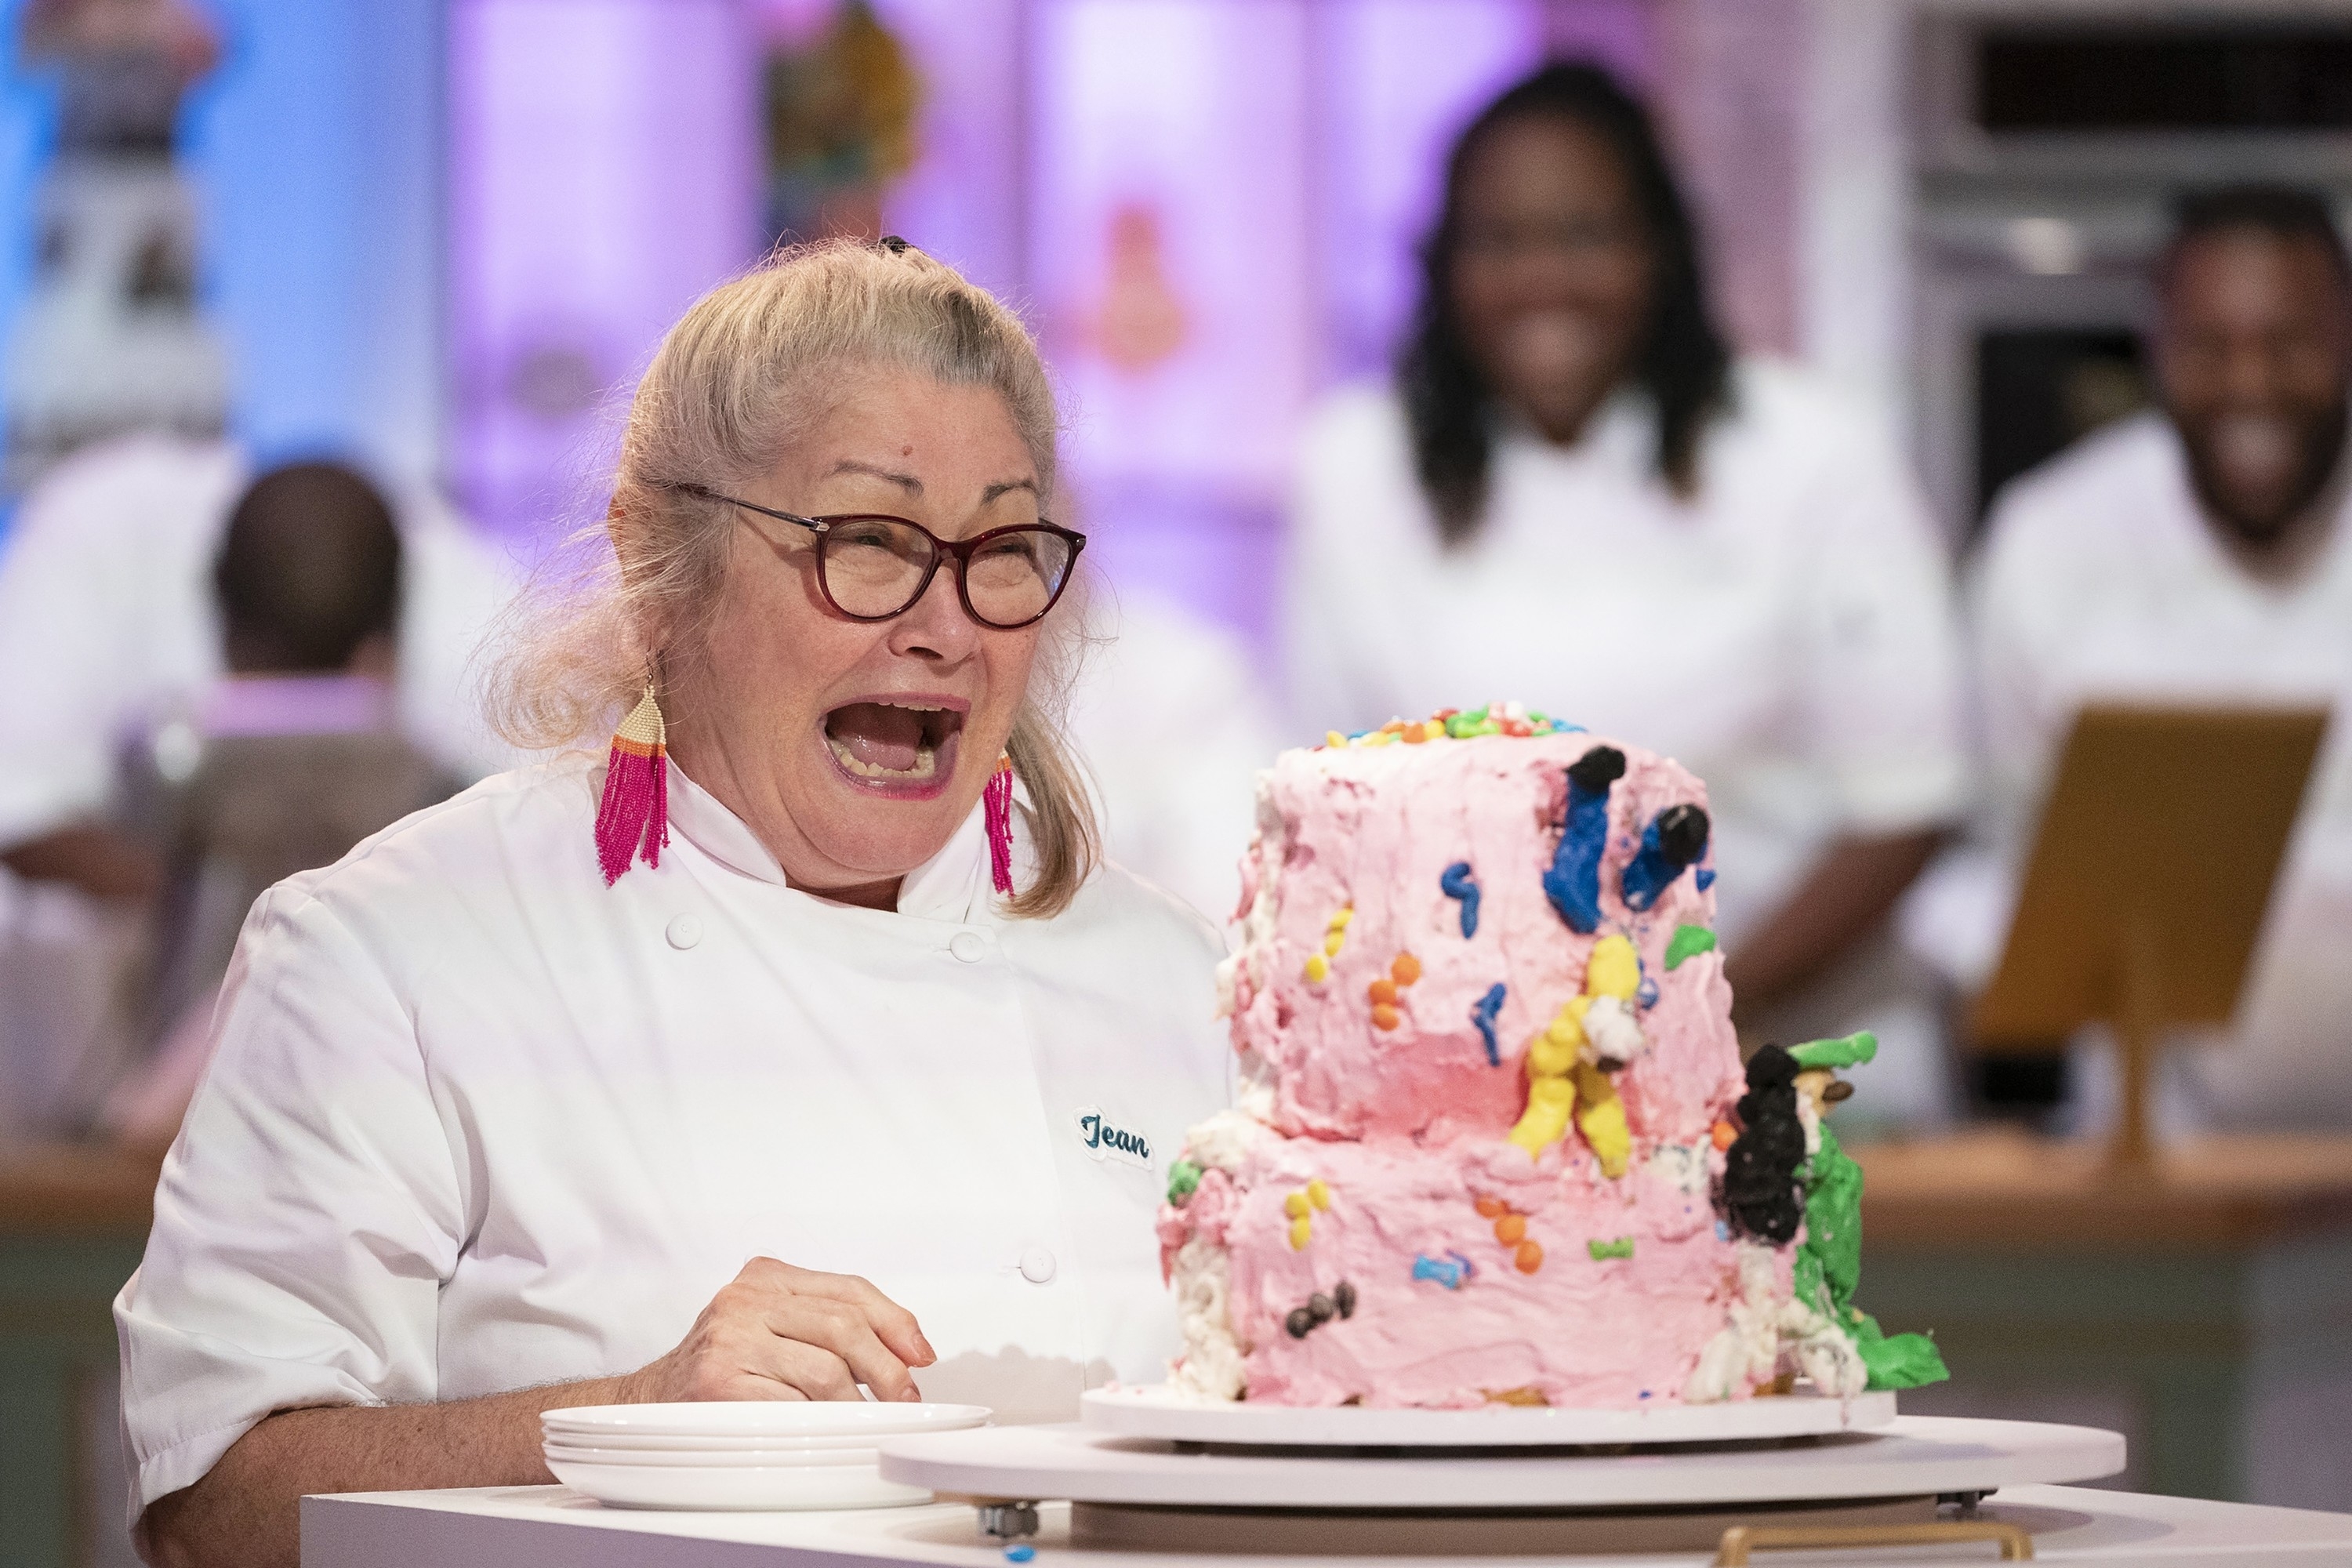 Woman in chef attire is surprised by a multi-tiered, colorful cake in front of her